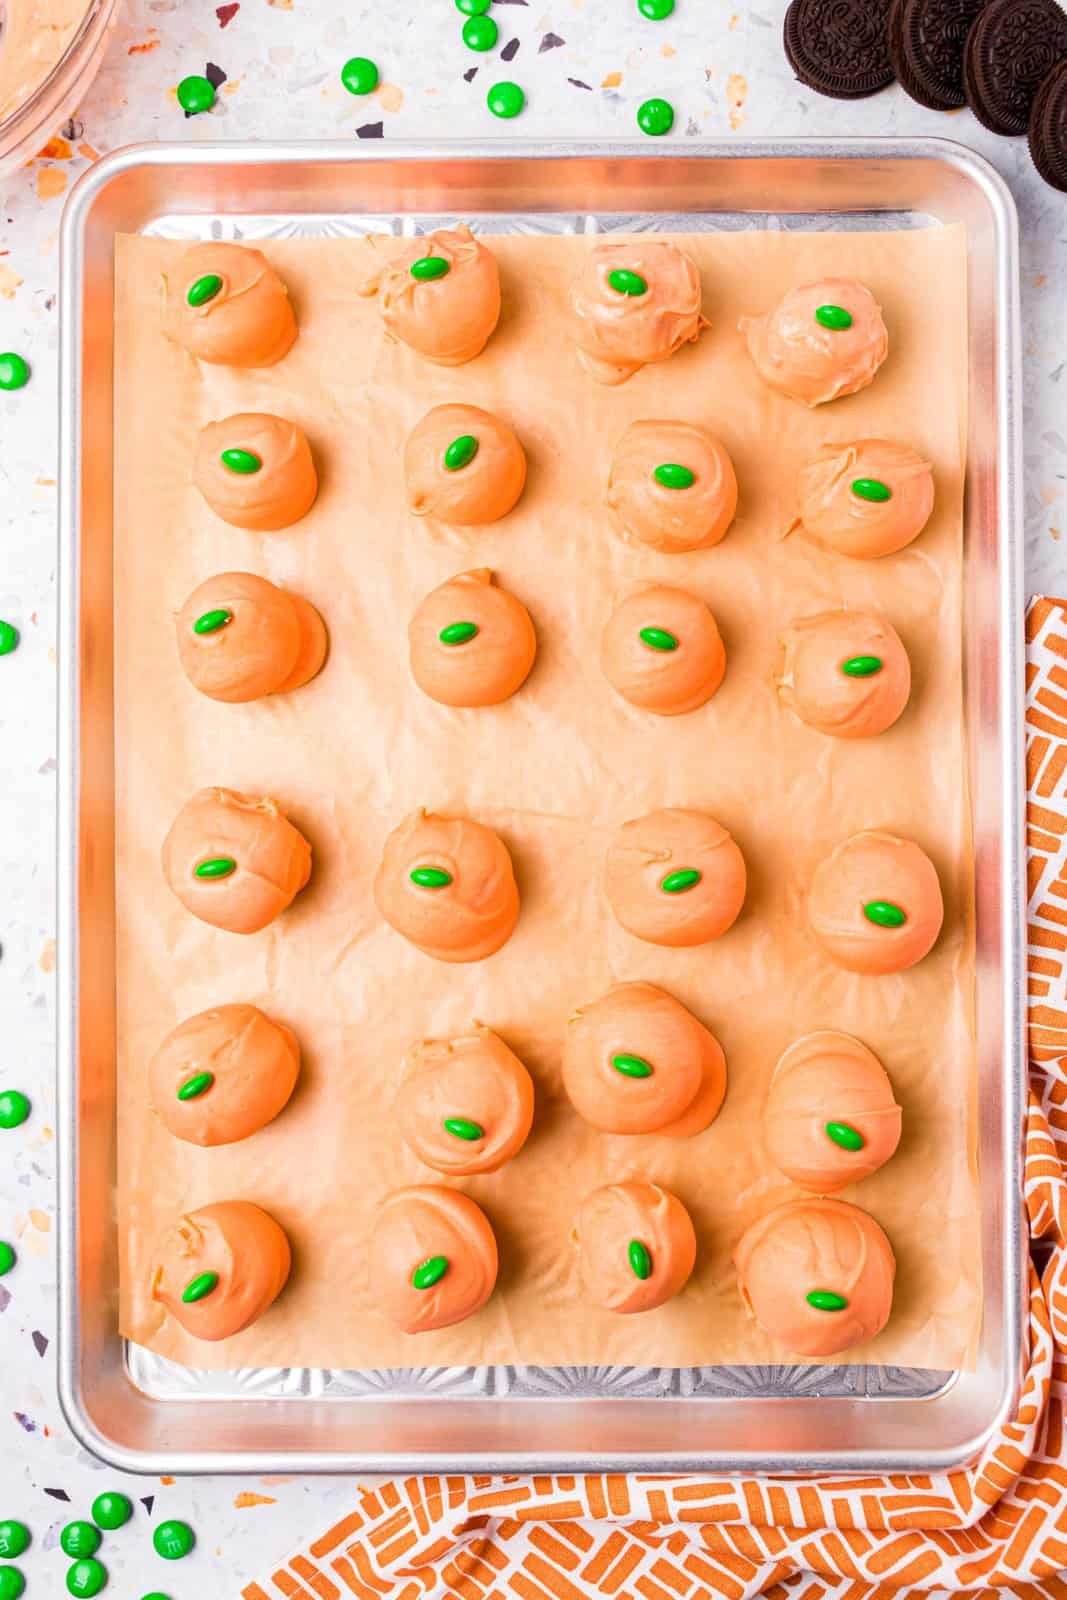 Balls placed back on parchment lined baking sheet topped with green M&M's.